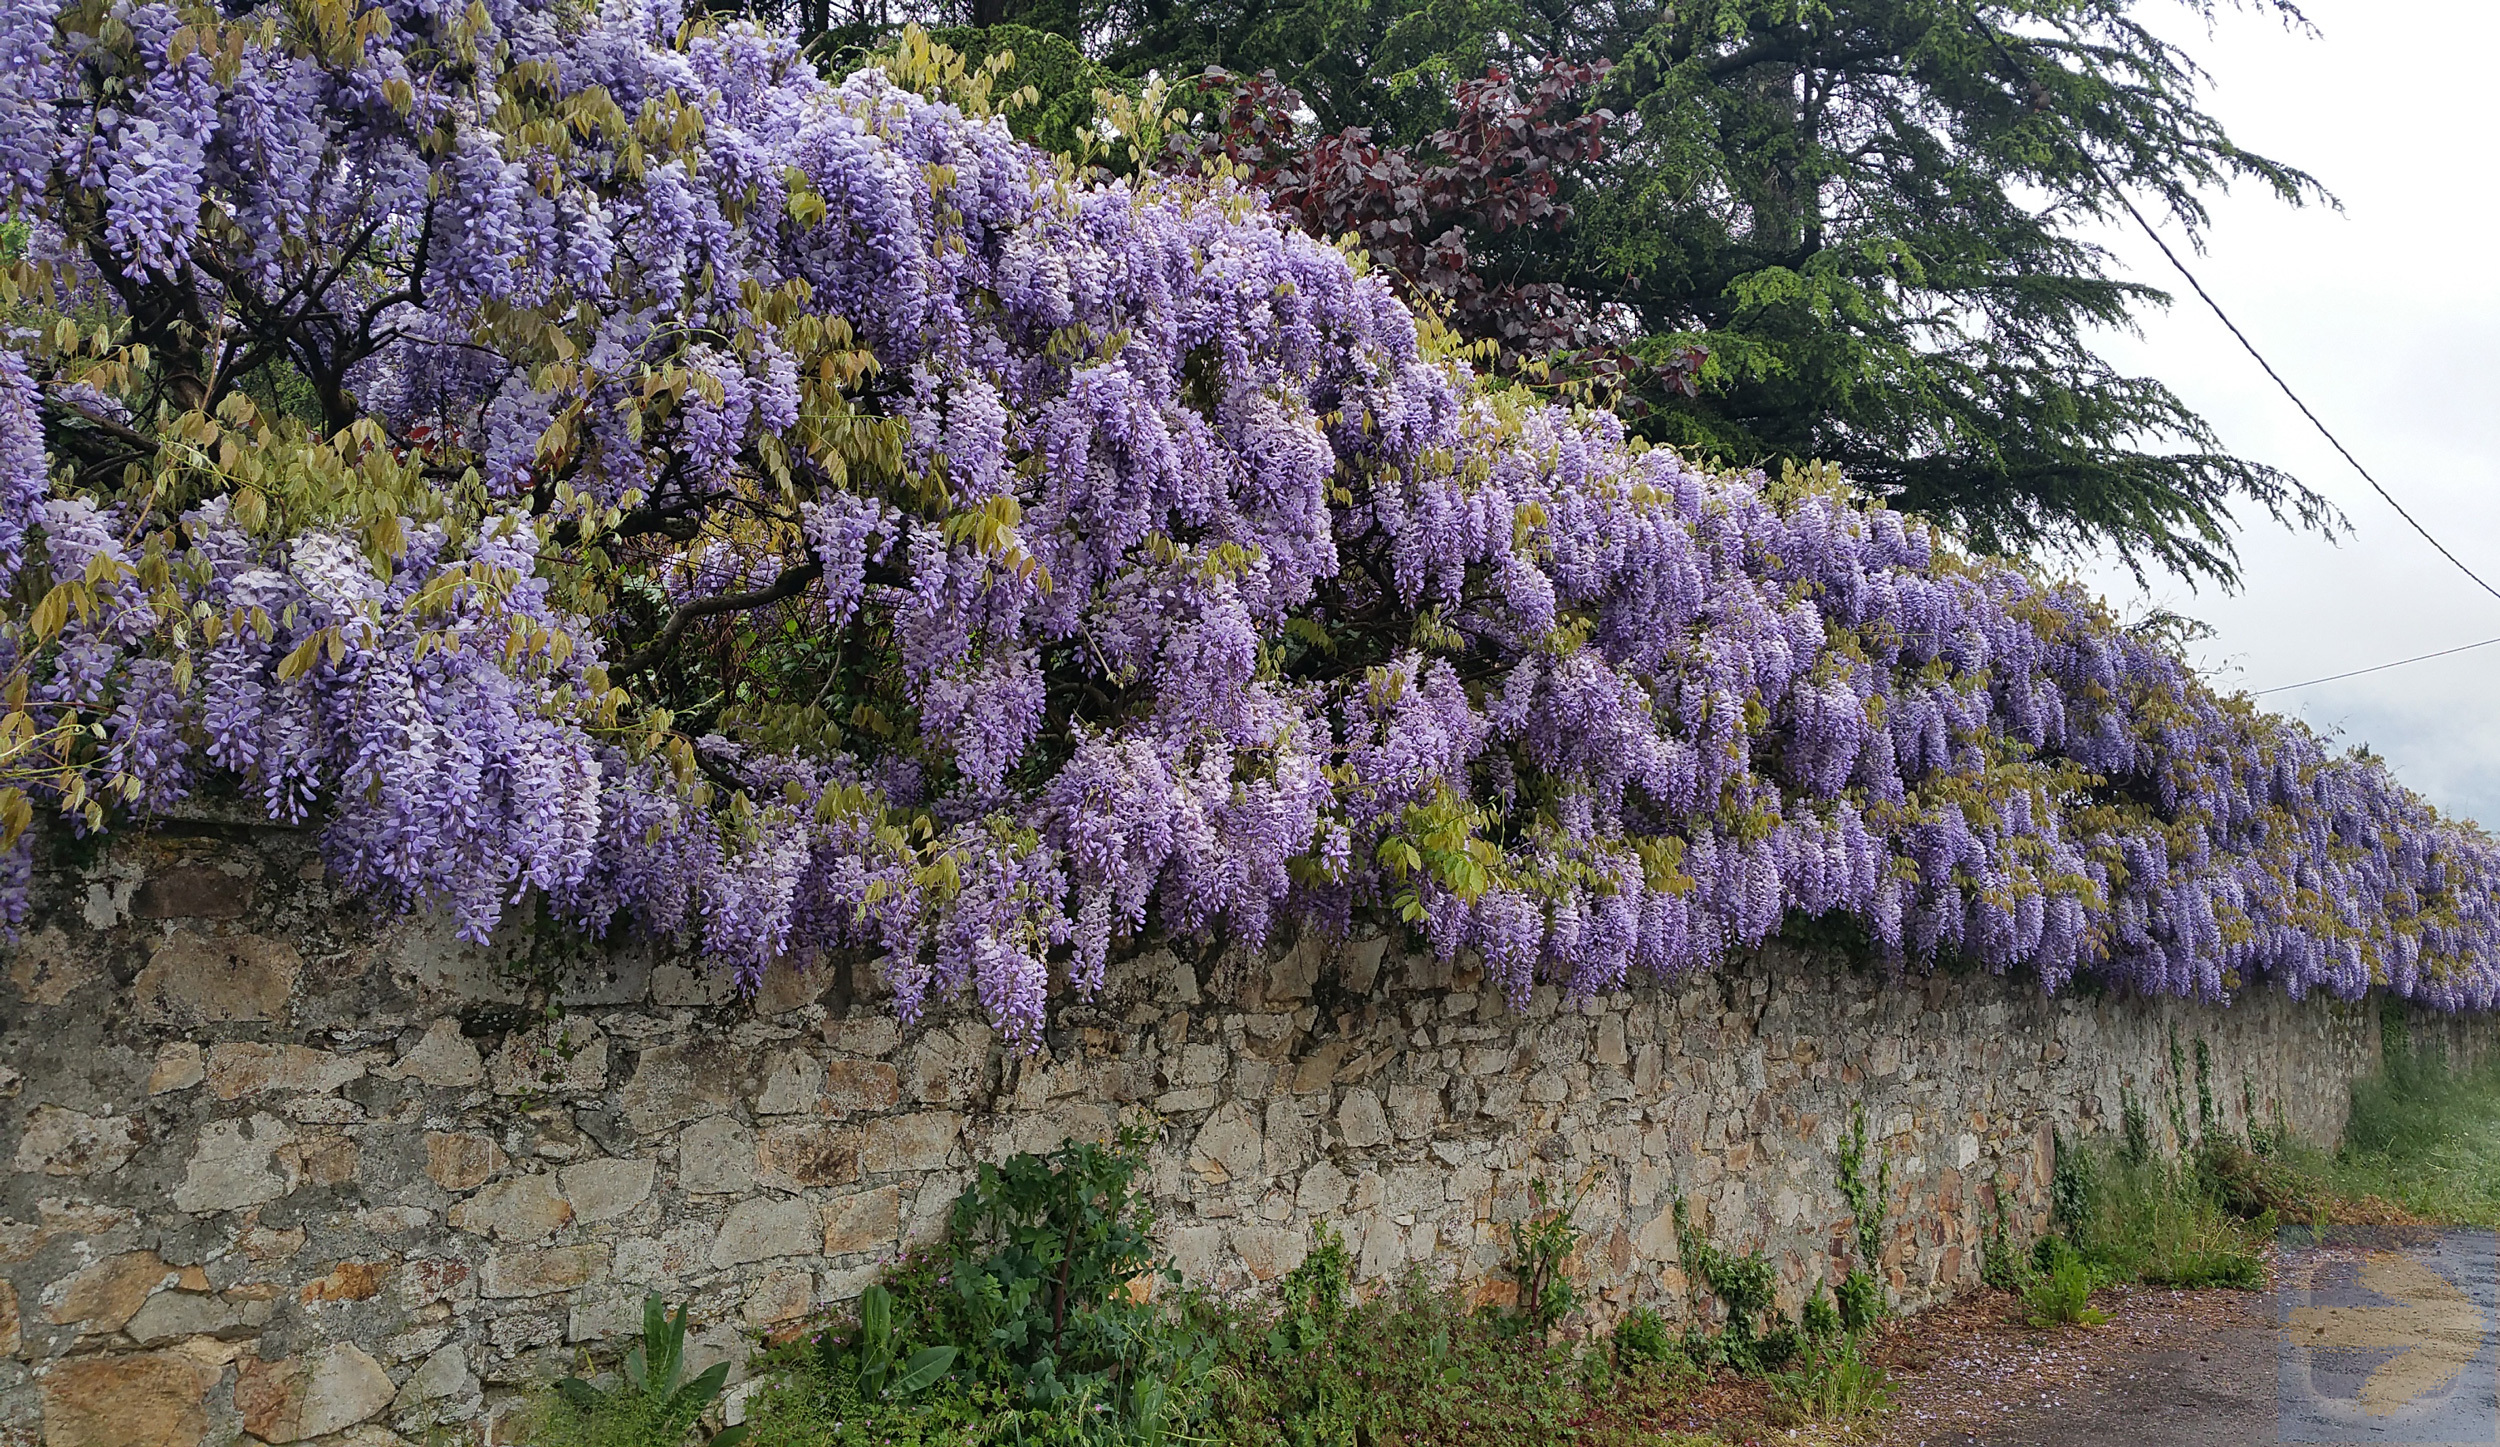 Wall of flowers, France